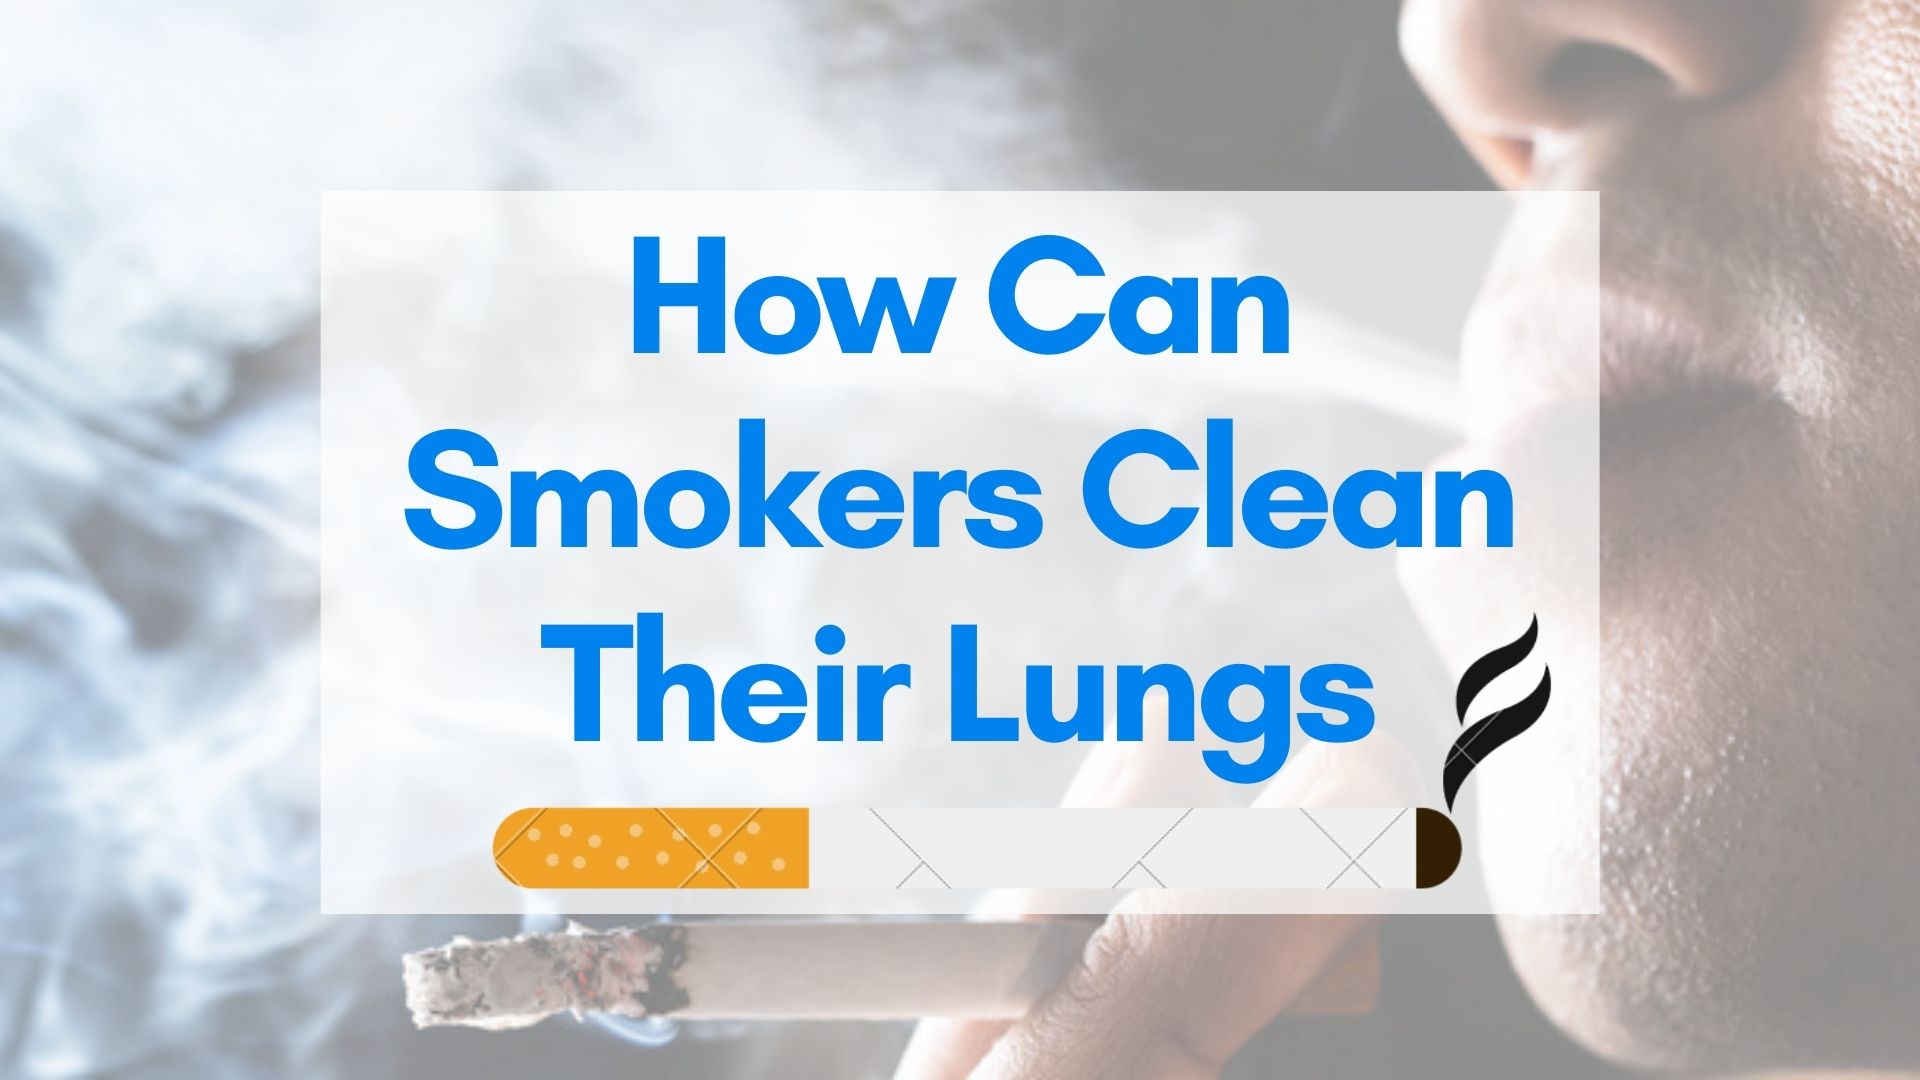 How Can Smokers Clean Their Lungs